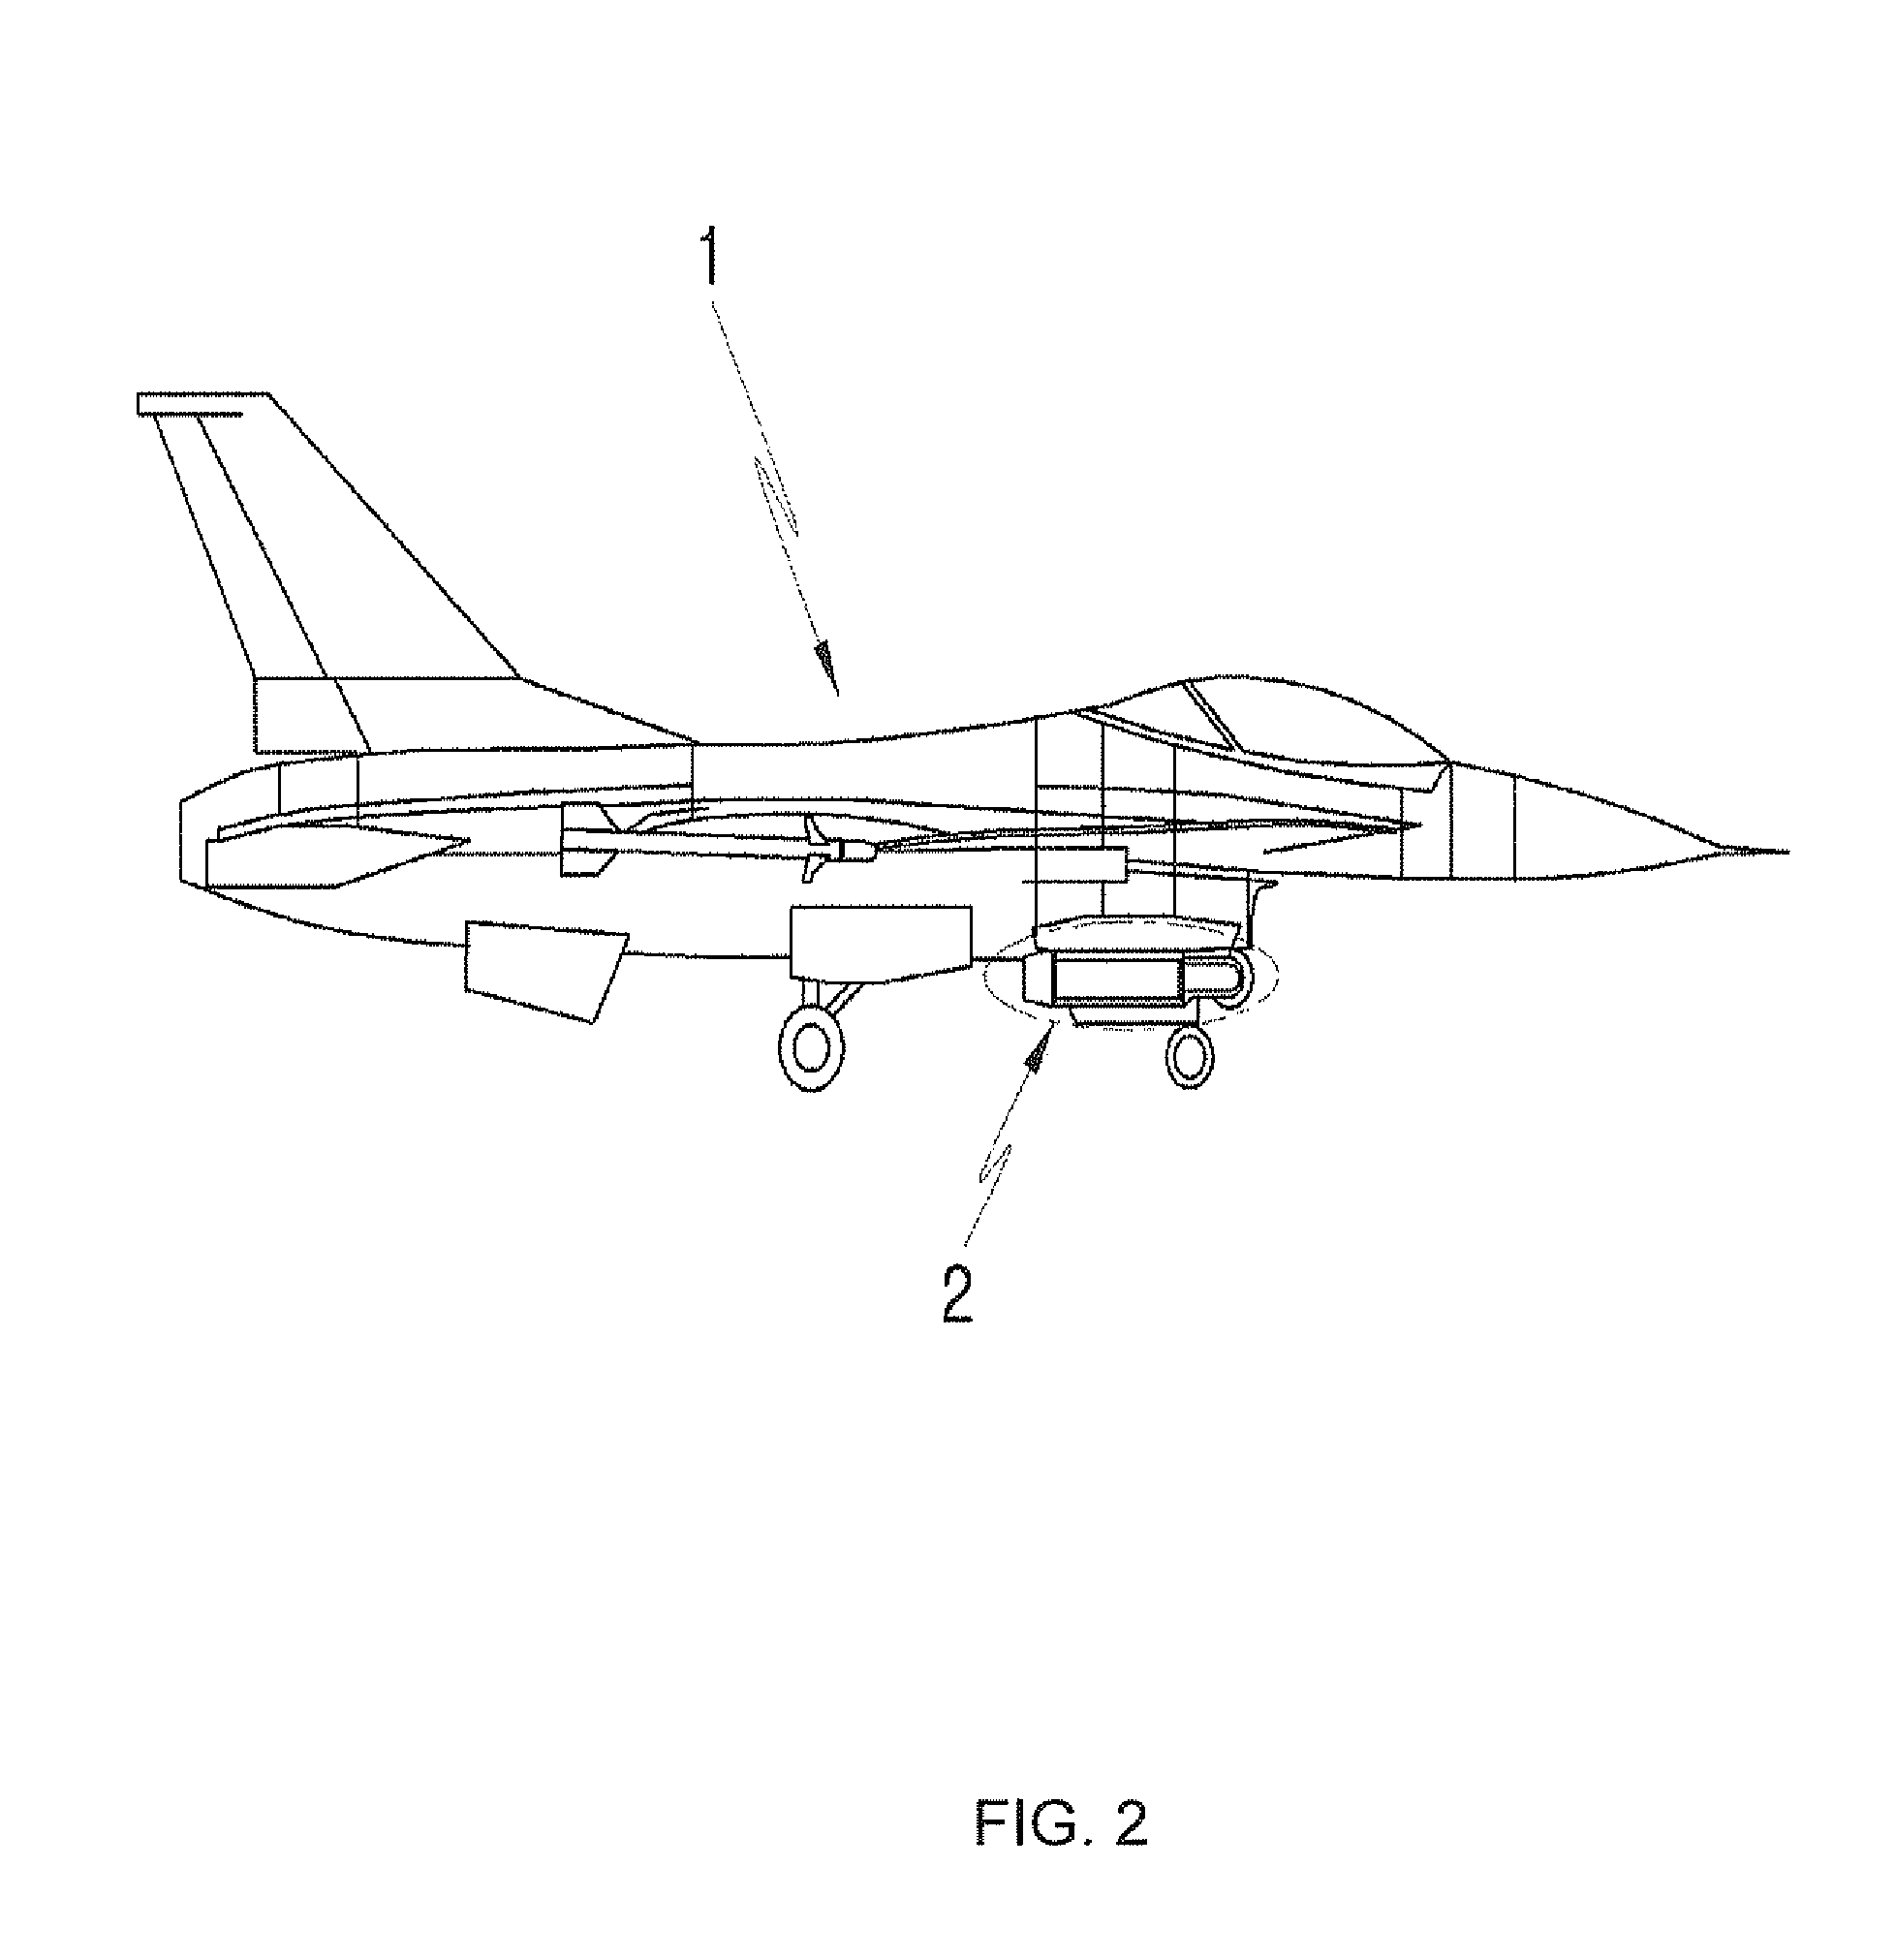 Small-size and light-weight environmental control unit for aircraft-external stores